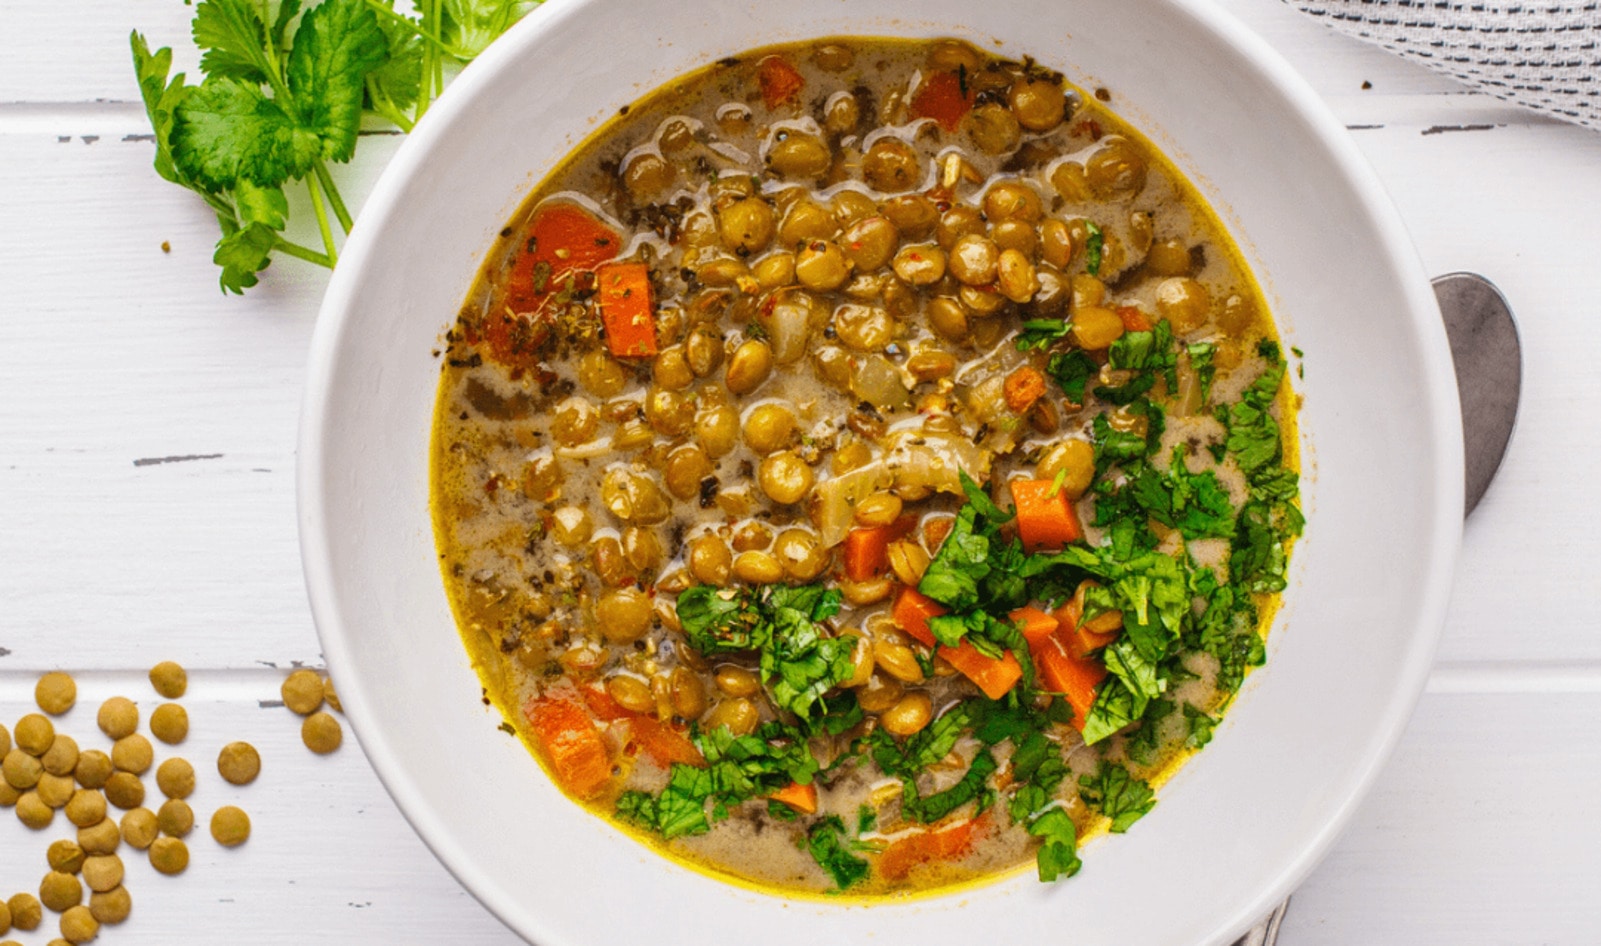 5 Healthy, Affordable Vegan Meals for Low-Energy Days